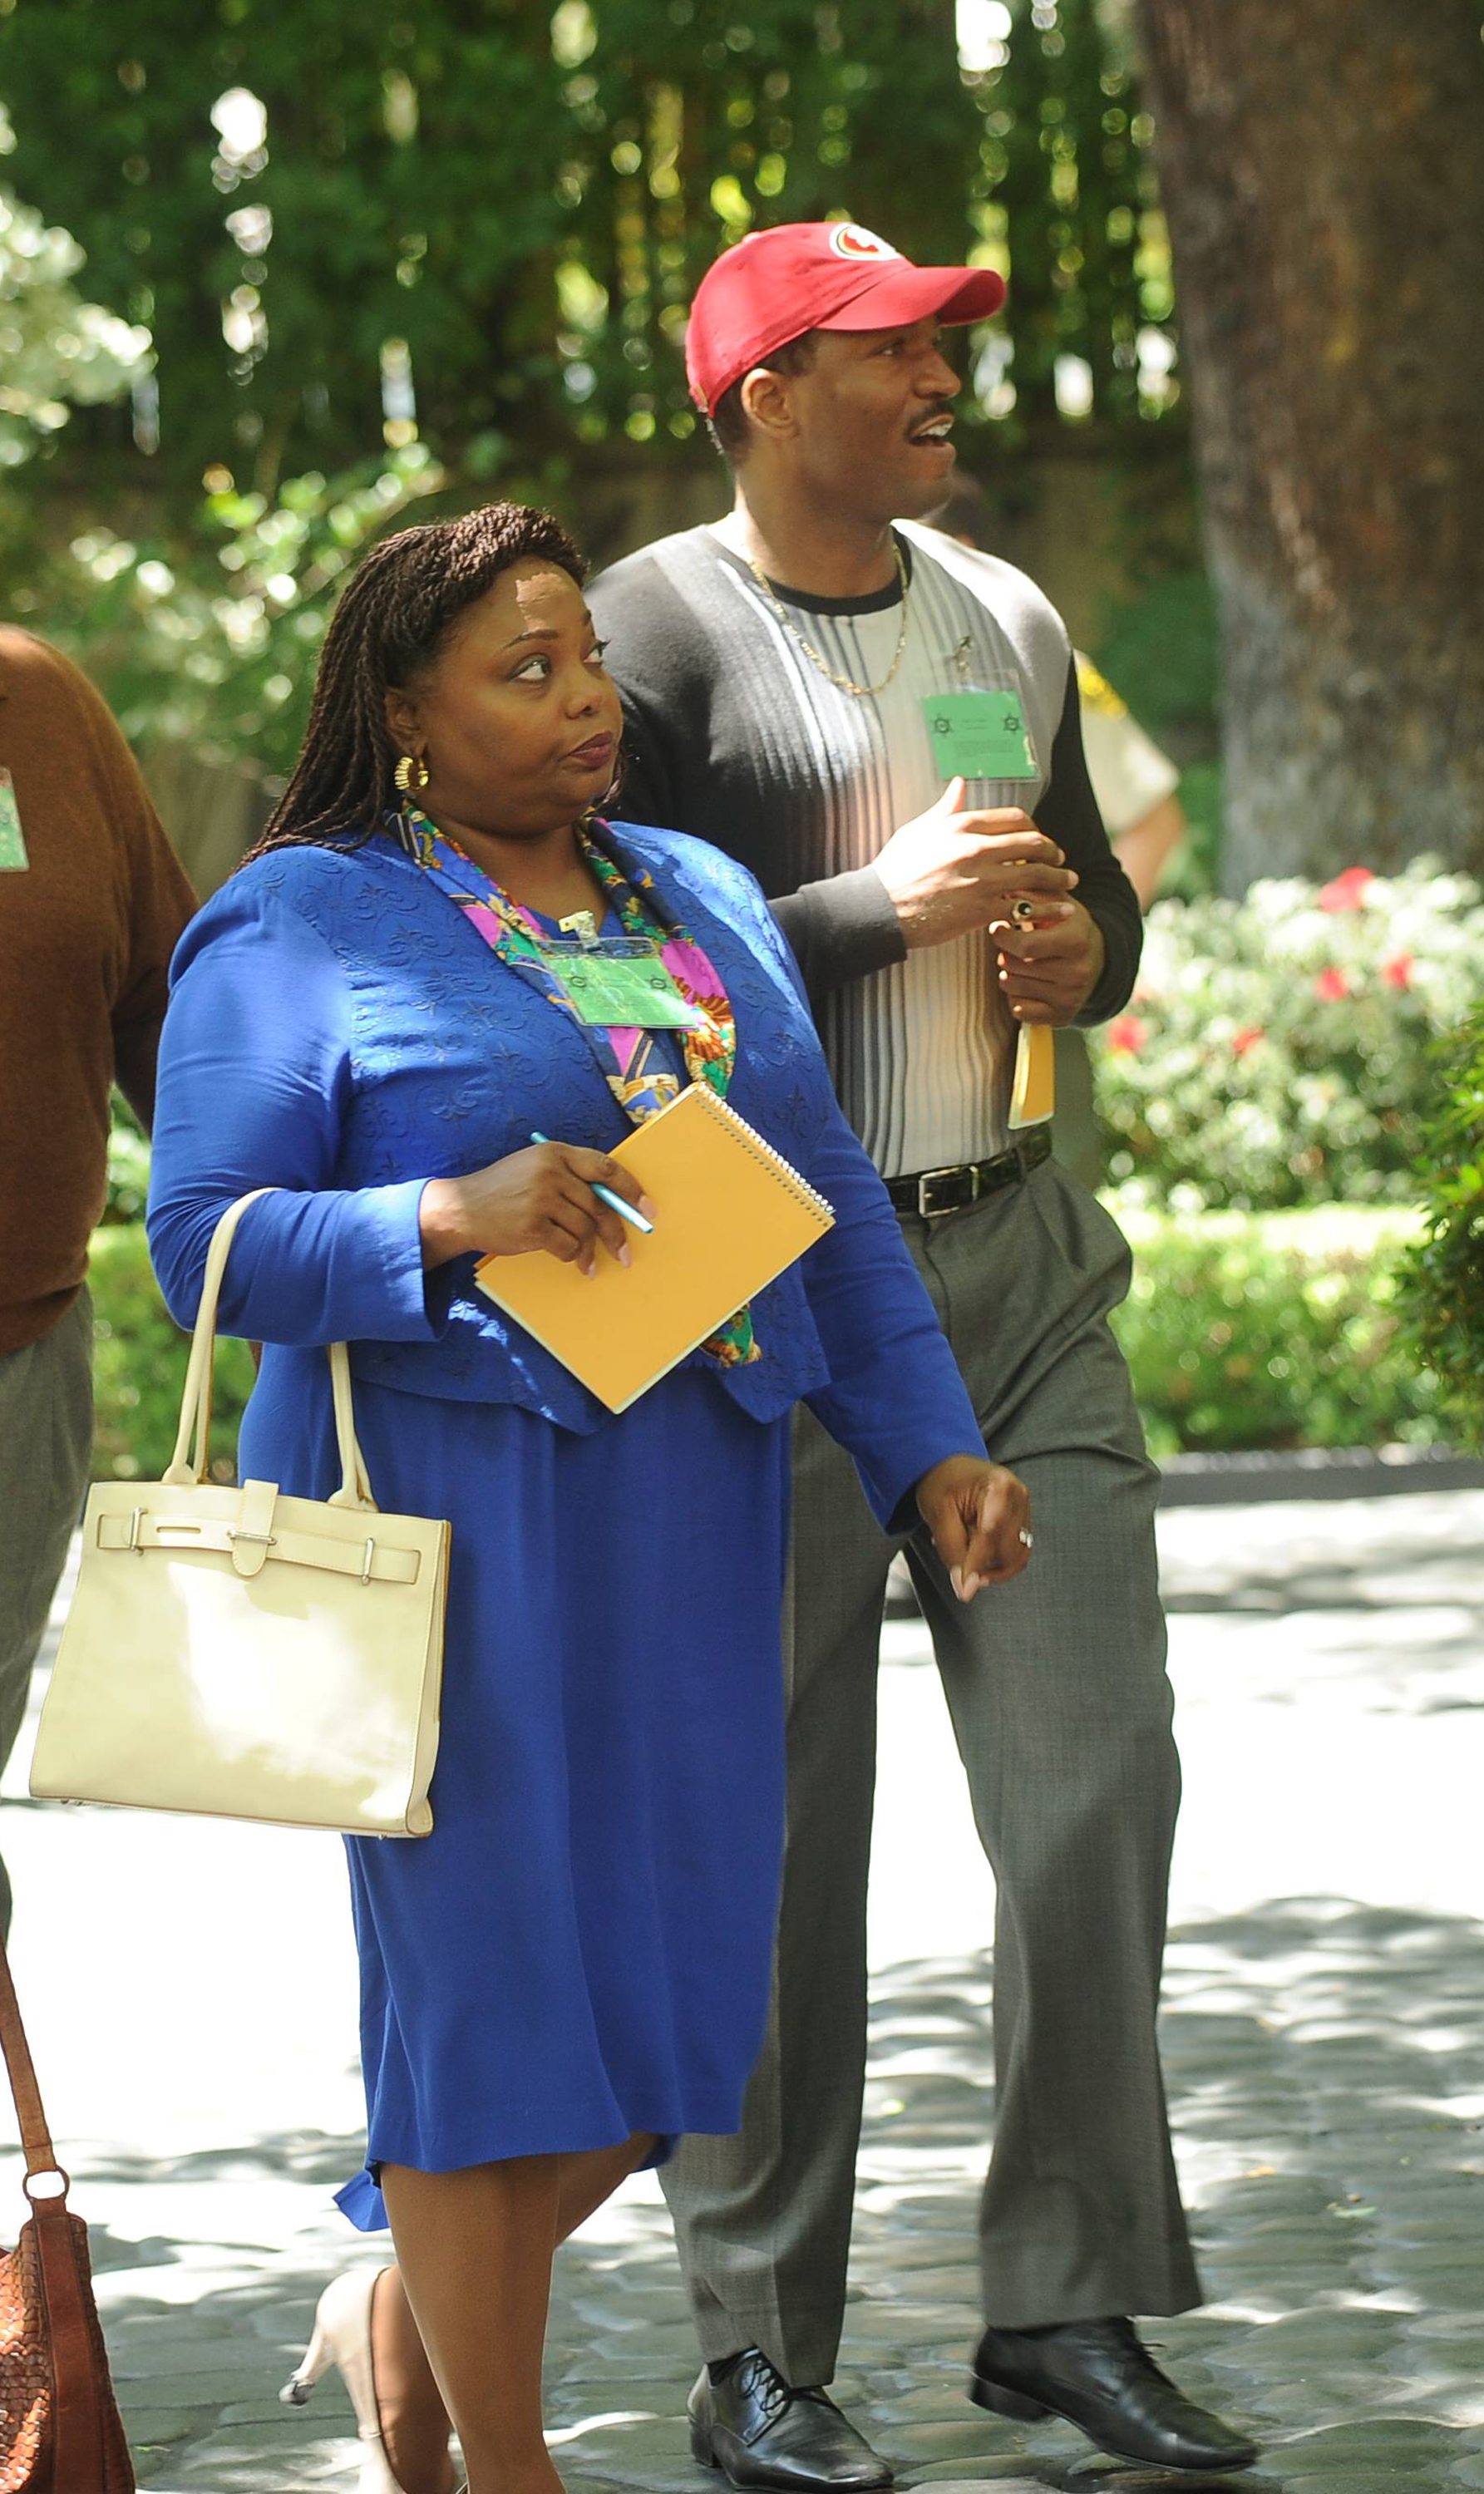 THE PEOPLE v. O.J. SIMPSON: AMERICAN CRIME STORY -- Pictured: (front) Cocoa Brown as Quen Bee/Juror. CR: Ray Mickshaw/FX